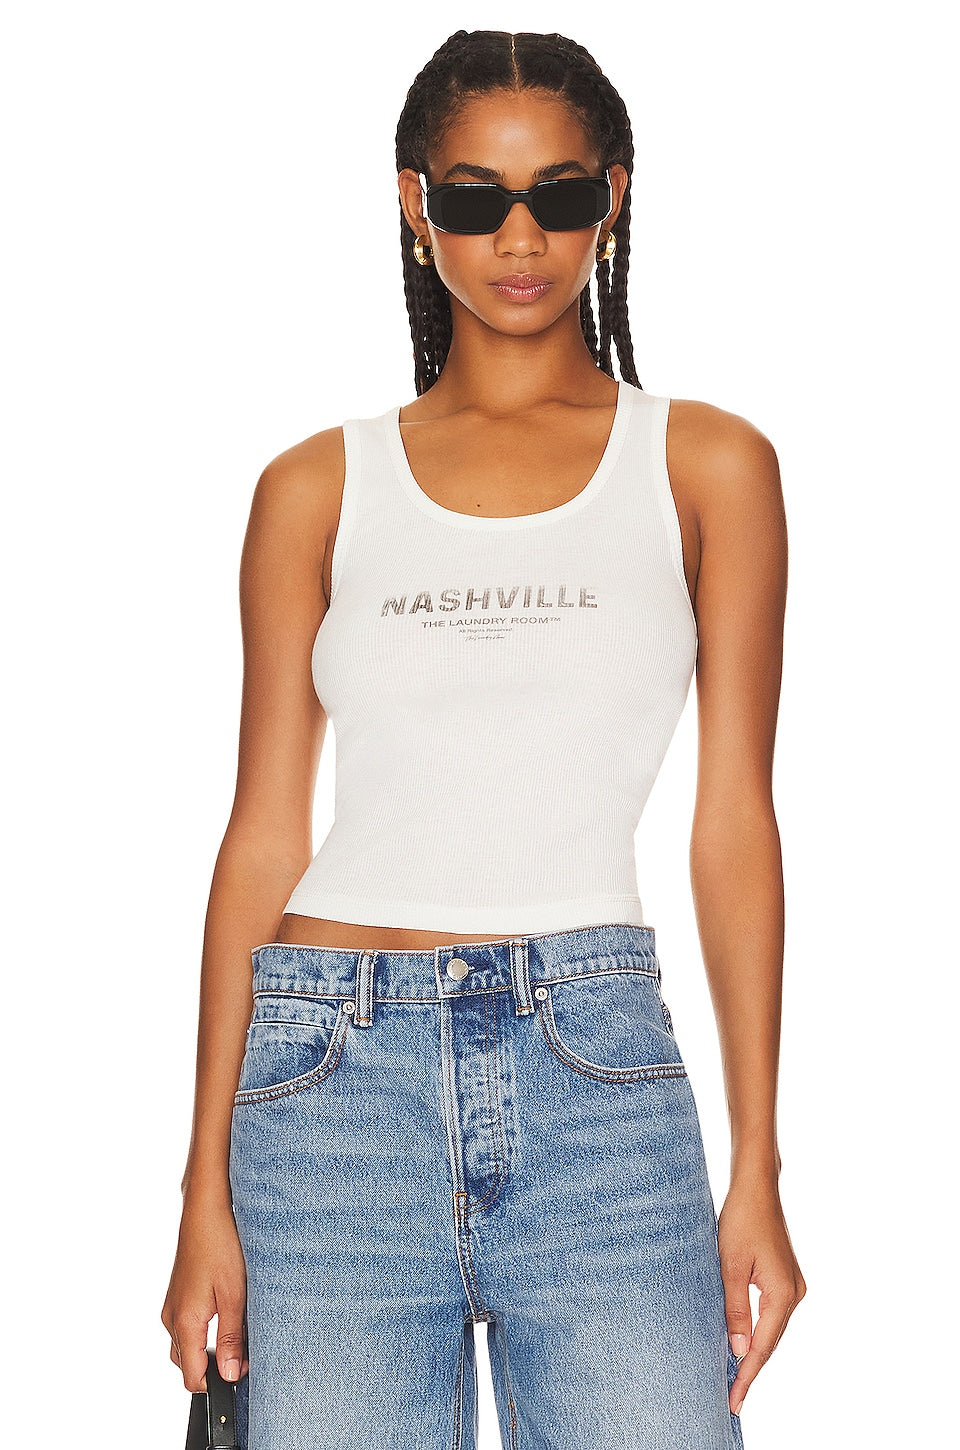 The Laundry Room Nashville Passport Stamp Rib Tank in White Size Small